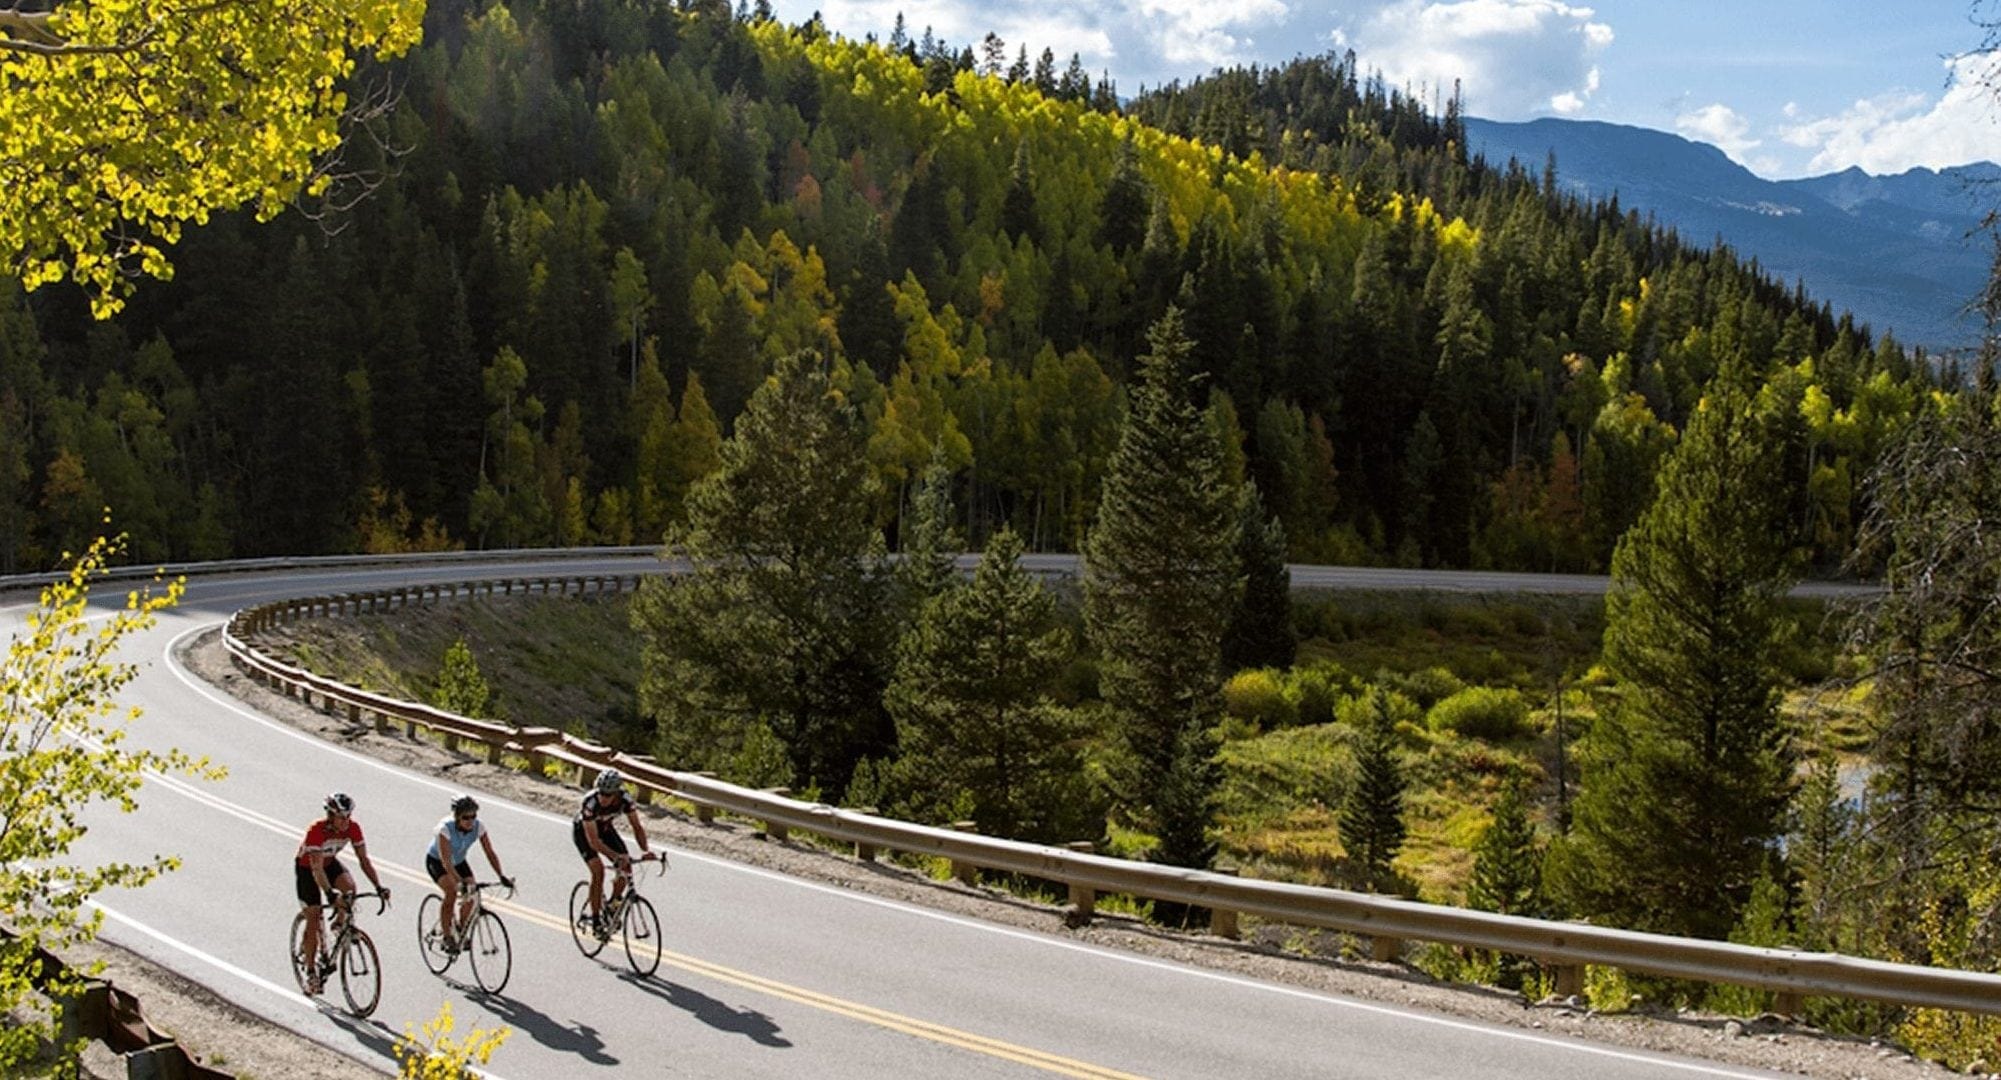 Cyclists on the road in Breckenridge